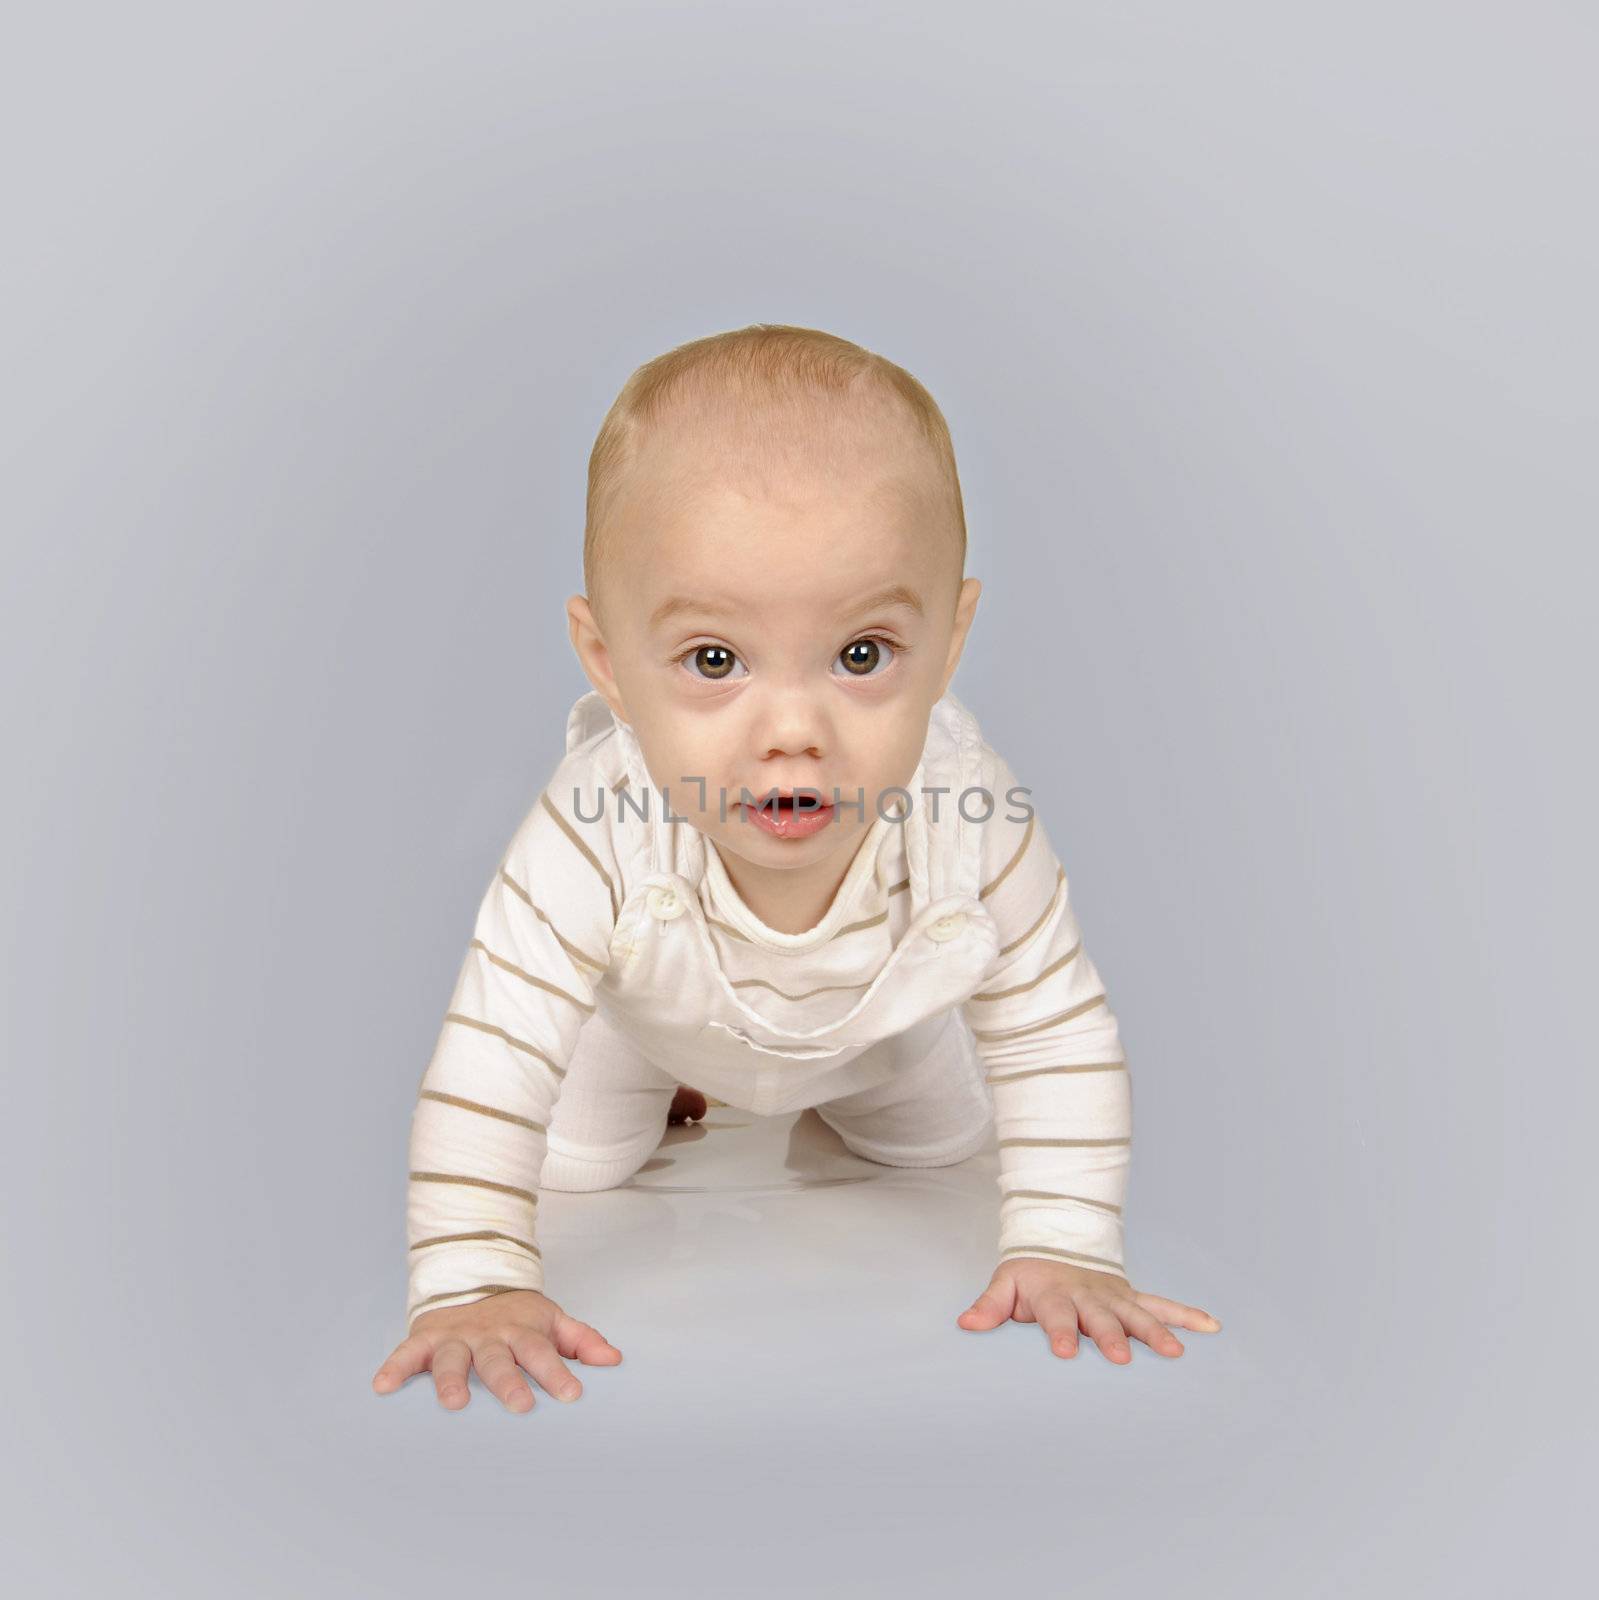 Cute little baby boy in white clothing by tish1